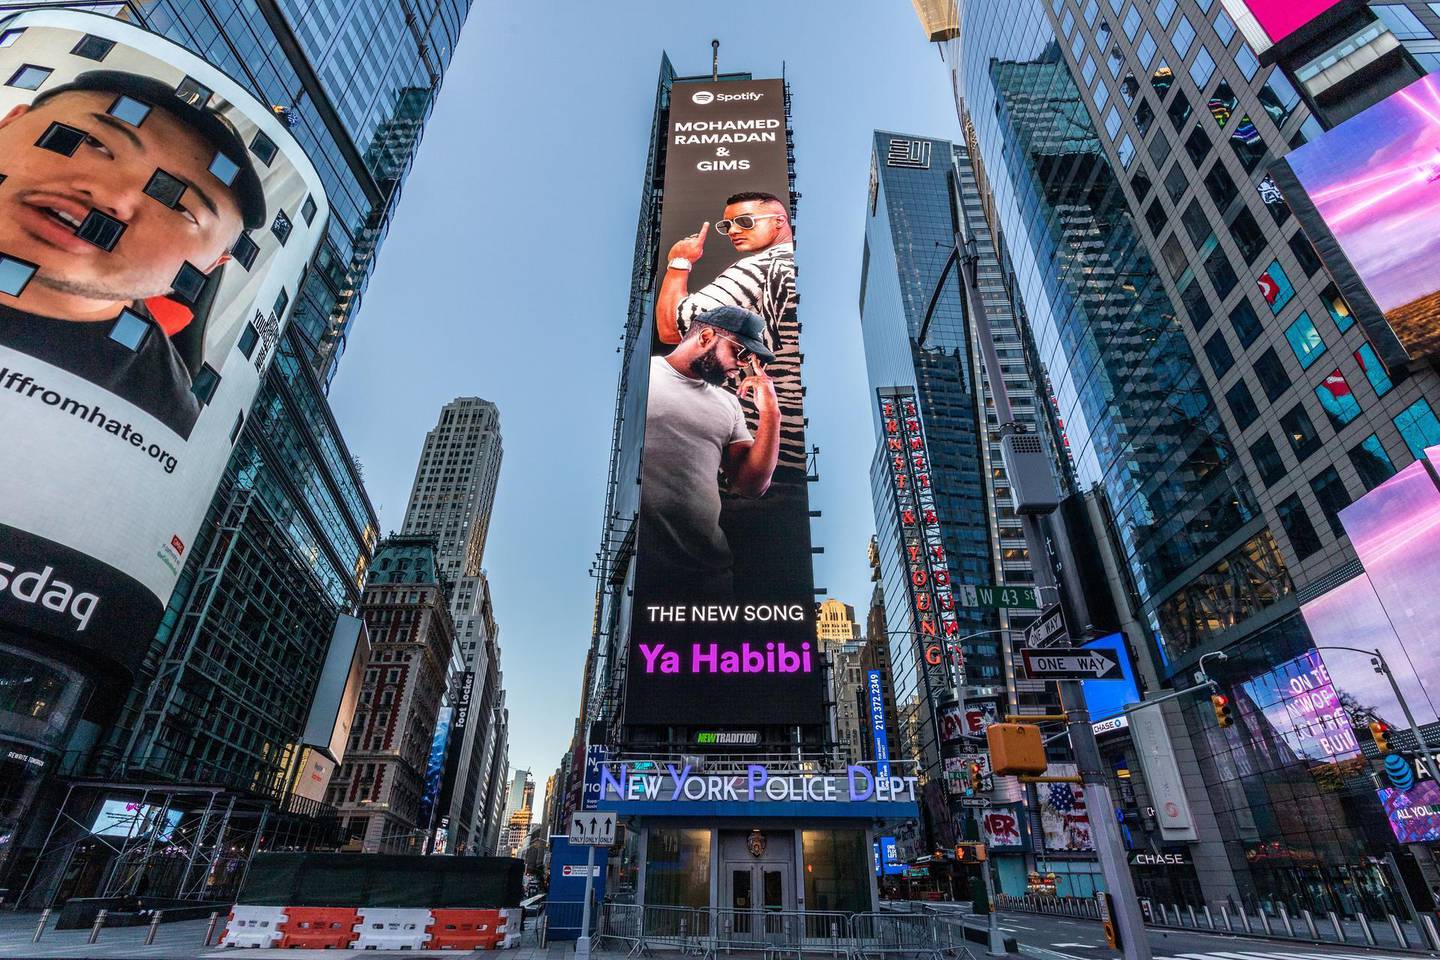 Mohamed Ramadan's new single promoted on Spotify's billboard in New York. Courtesy Spotify